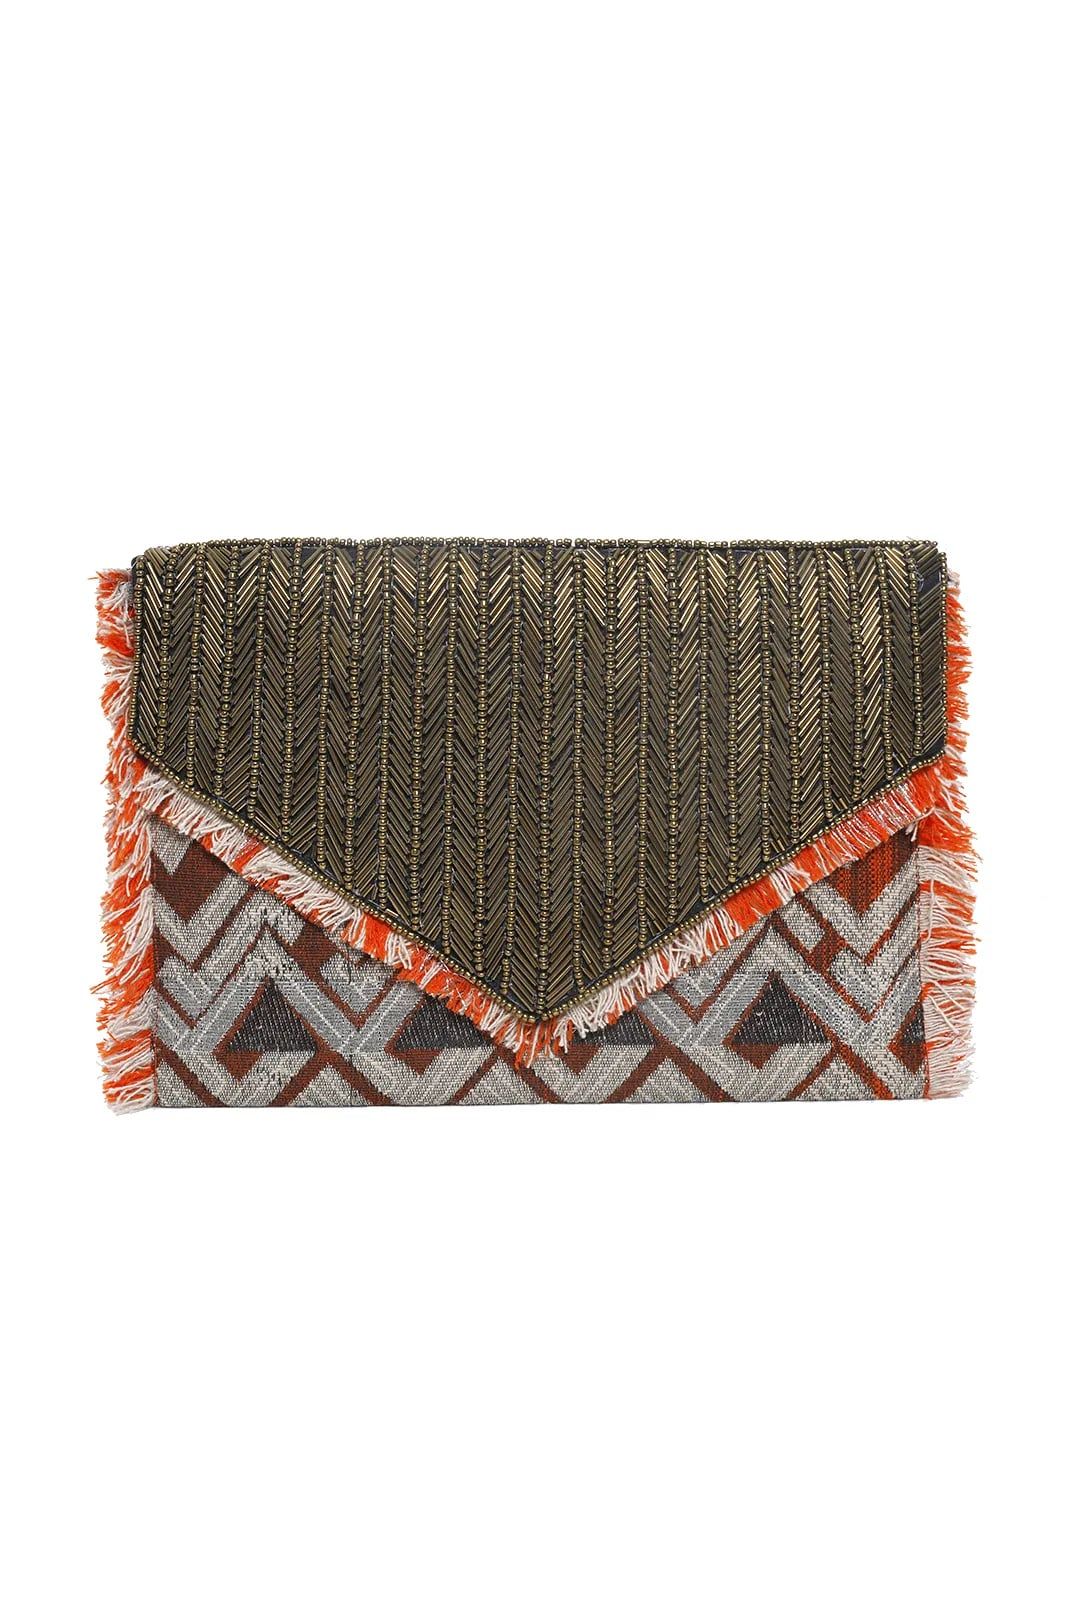 Aztec Beaded Tassel Clutch by Adorne, available for purchase